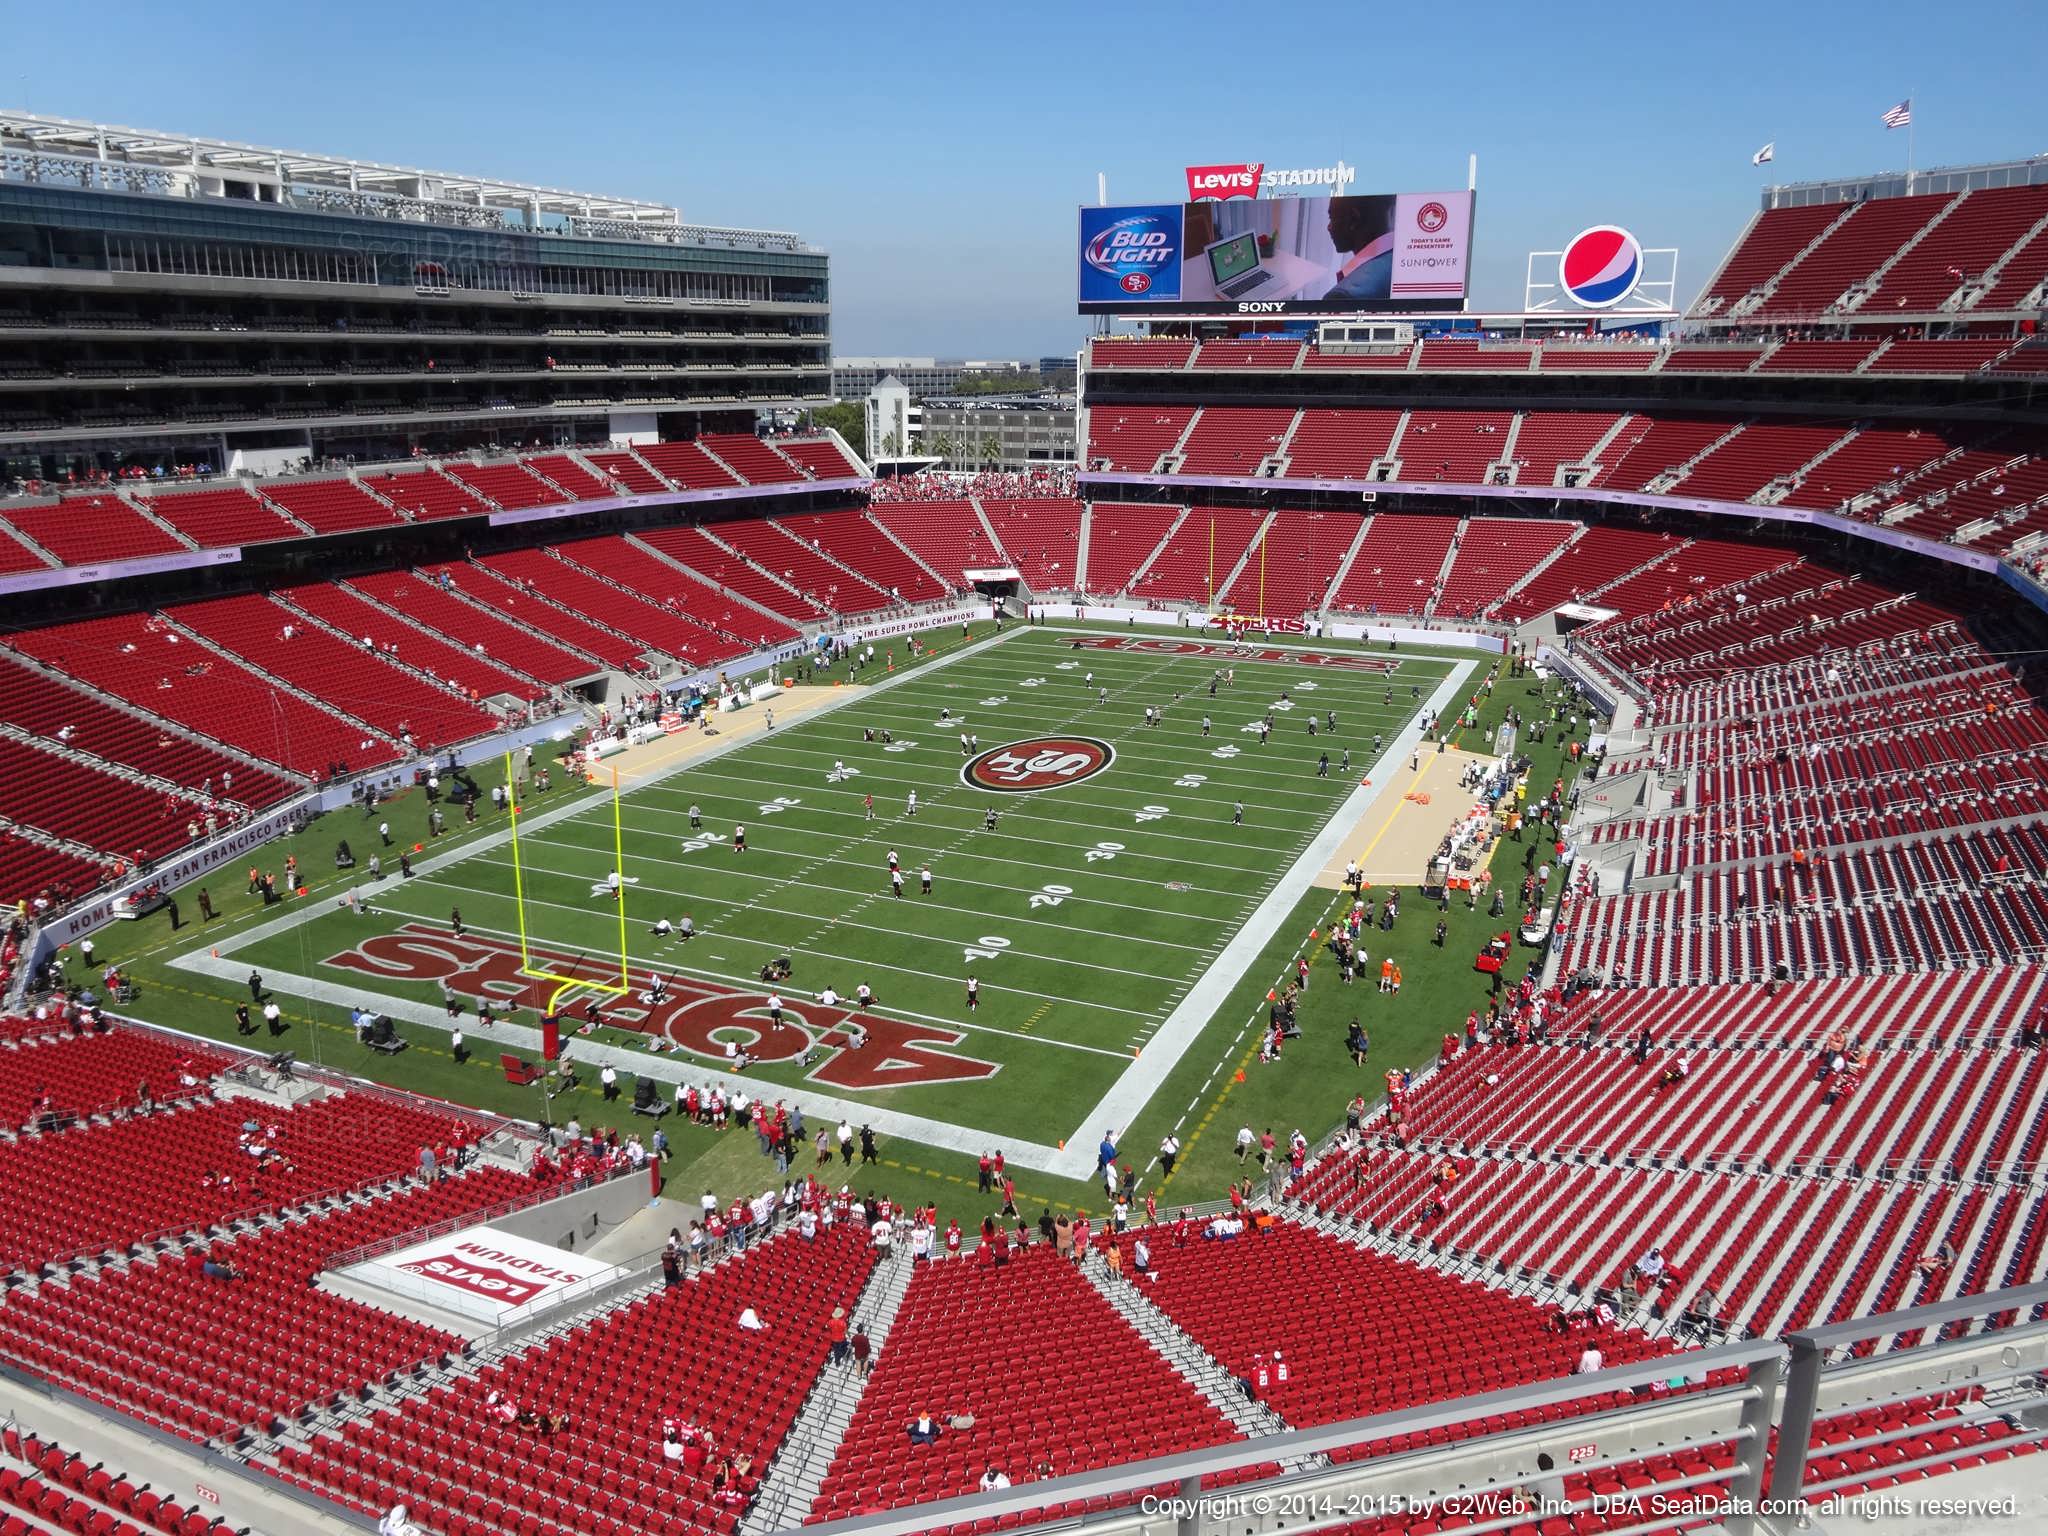 Seat view from section 323 at Levi’s Stadium, home of the San Francisco 49ers